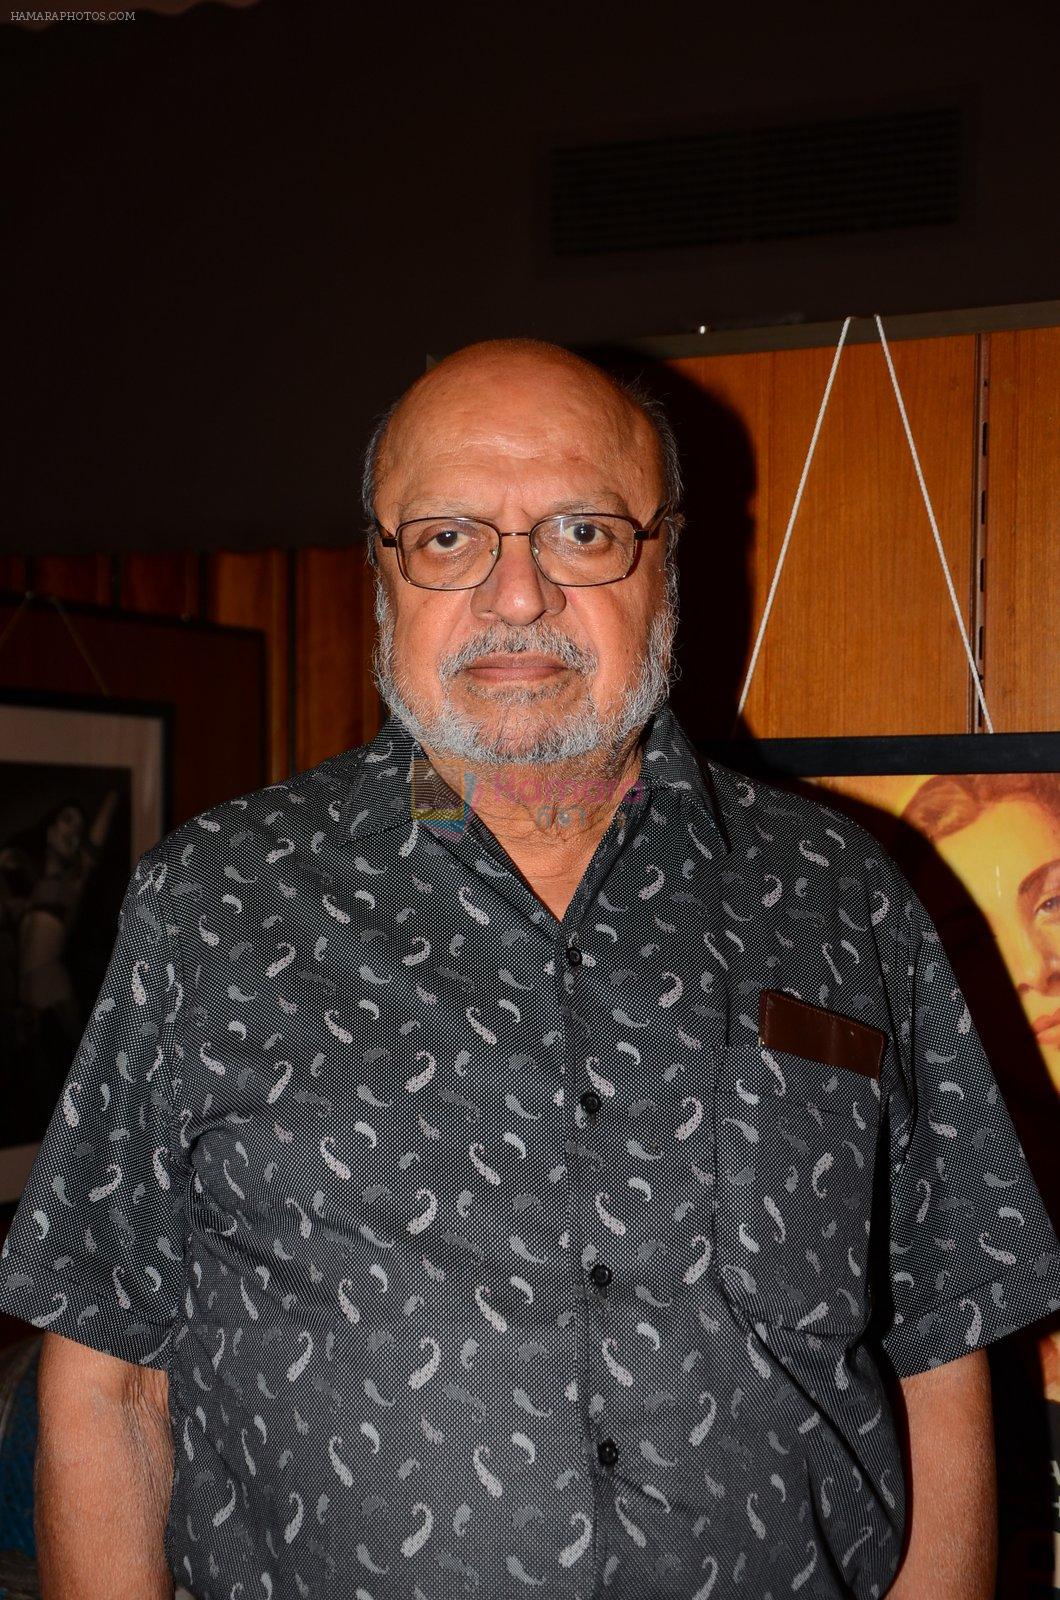 Shyam Benegal at Osian film festival on 4th March 2016